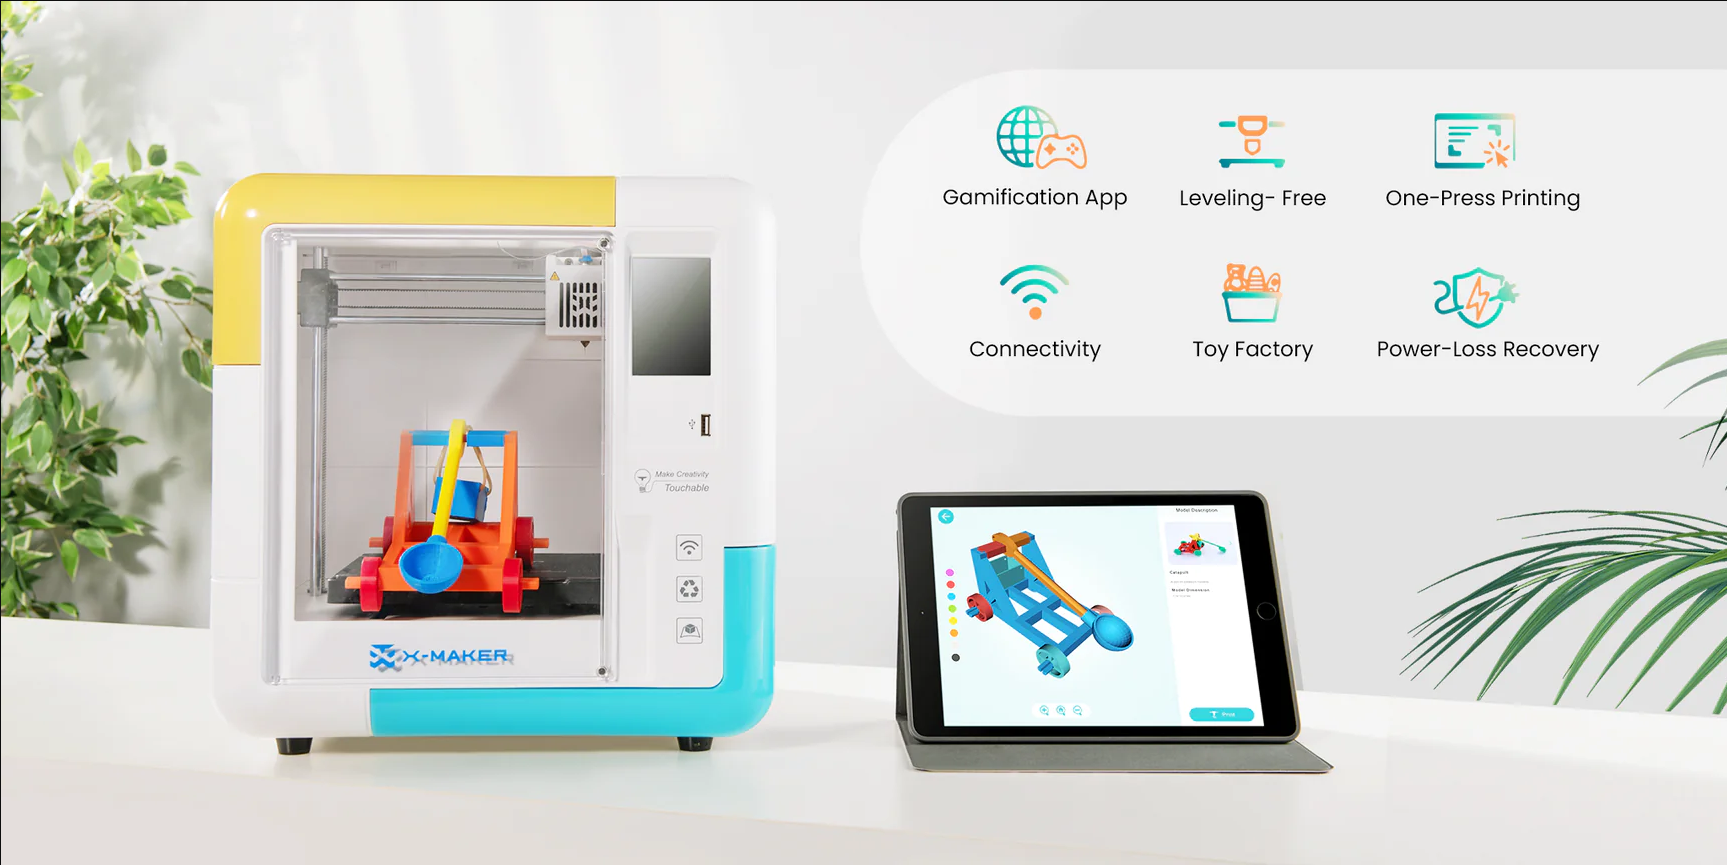 eksplicit fotografering faldt Launching AOSEED X-MAKER V4.0 : a gamified 3D Printer for Kids and Family